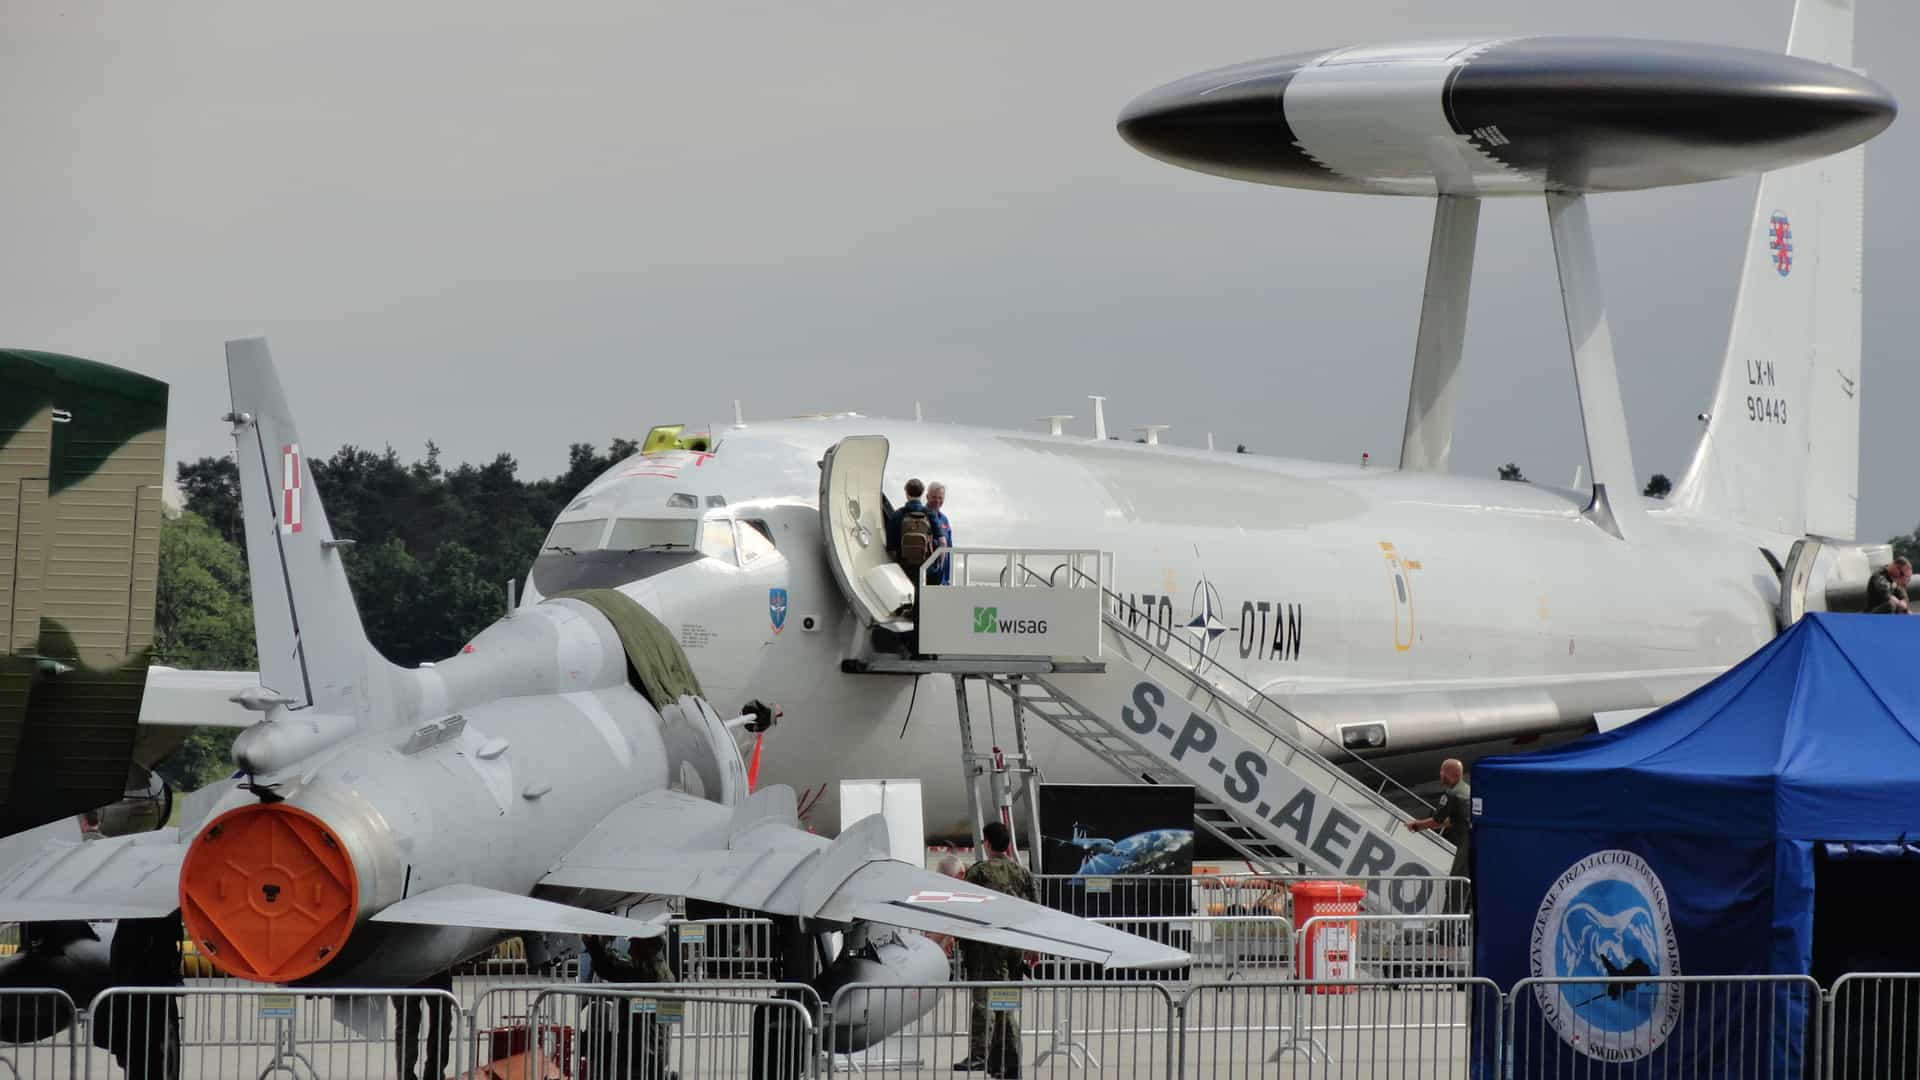 S-P-S at the ILA-Berlin Air Show